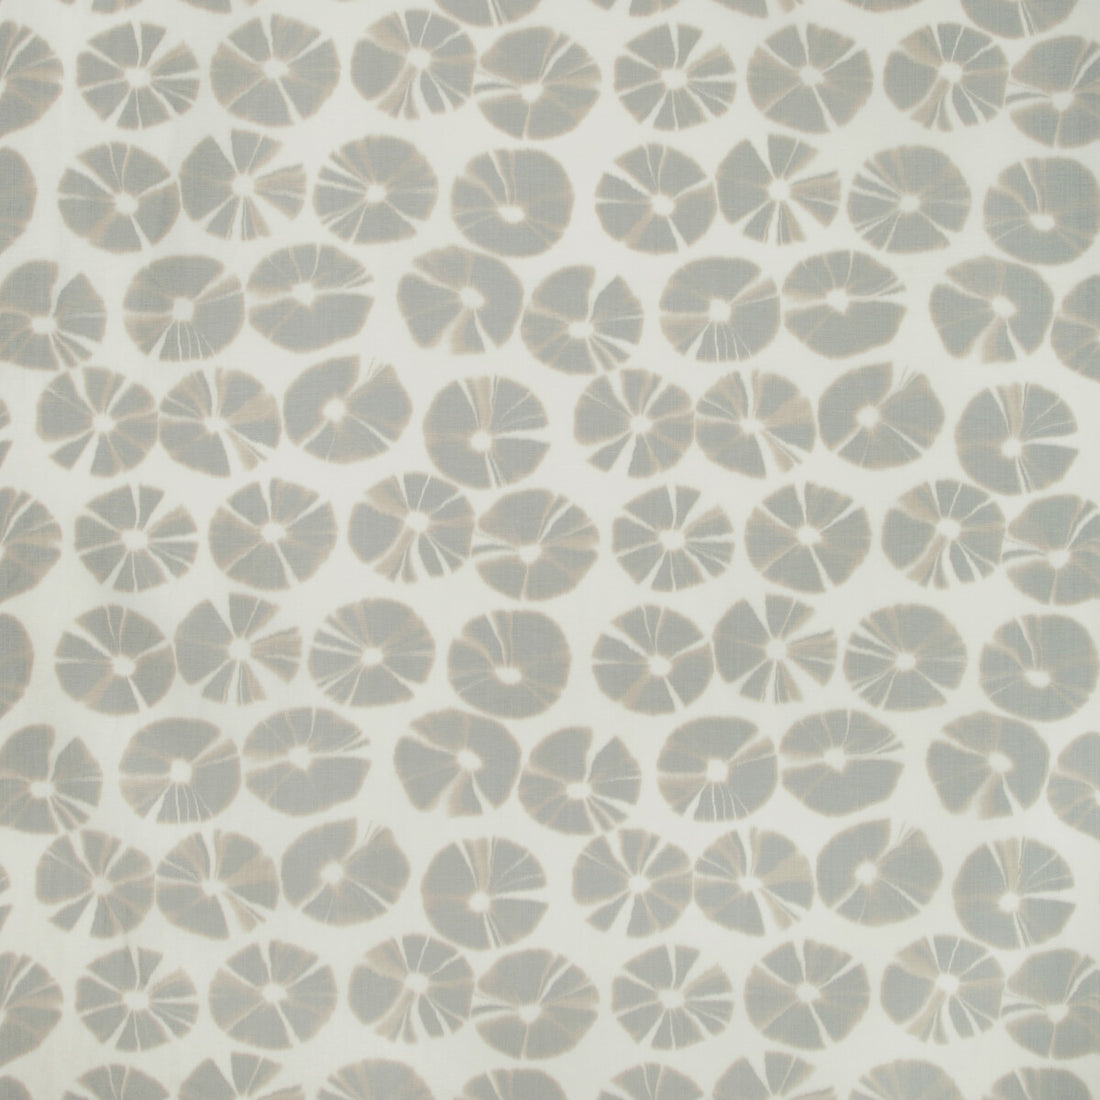 Echino fabric in greystone color - pattern ECHINO.106.0 - by Kravet Couture in the Terrae Prints collection